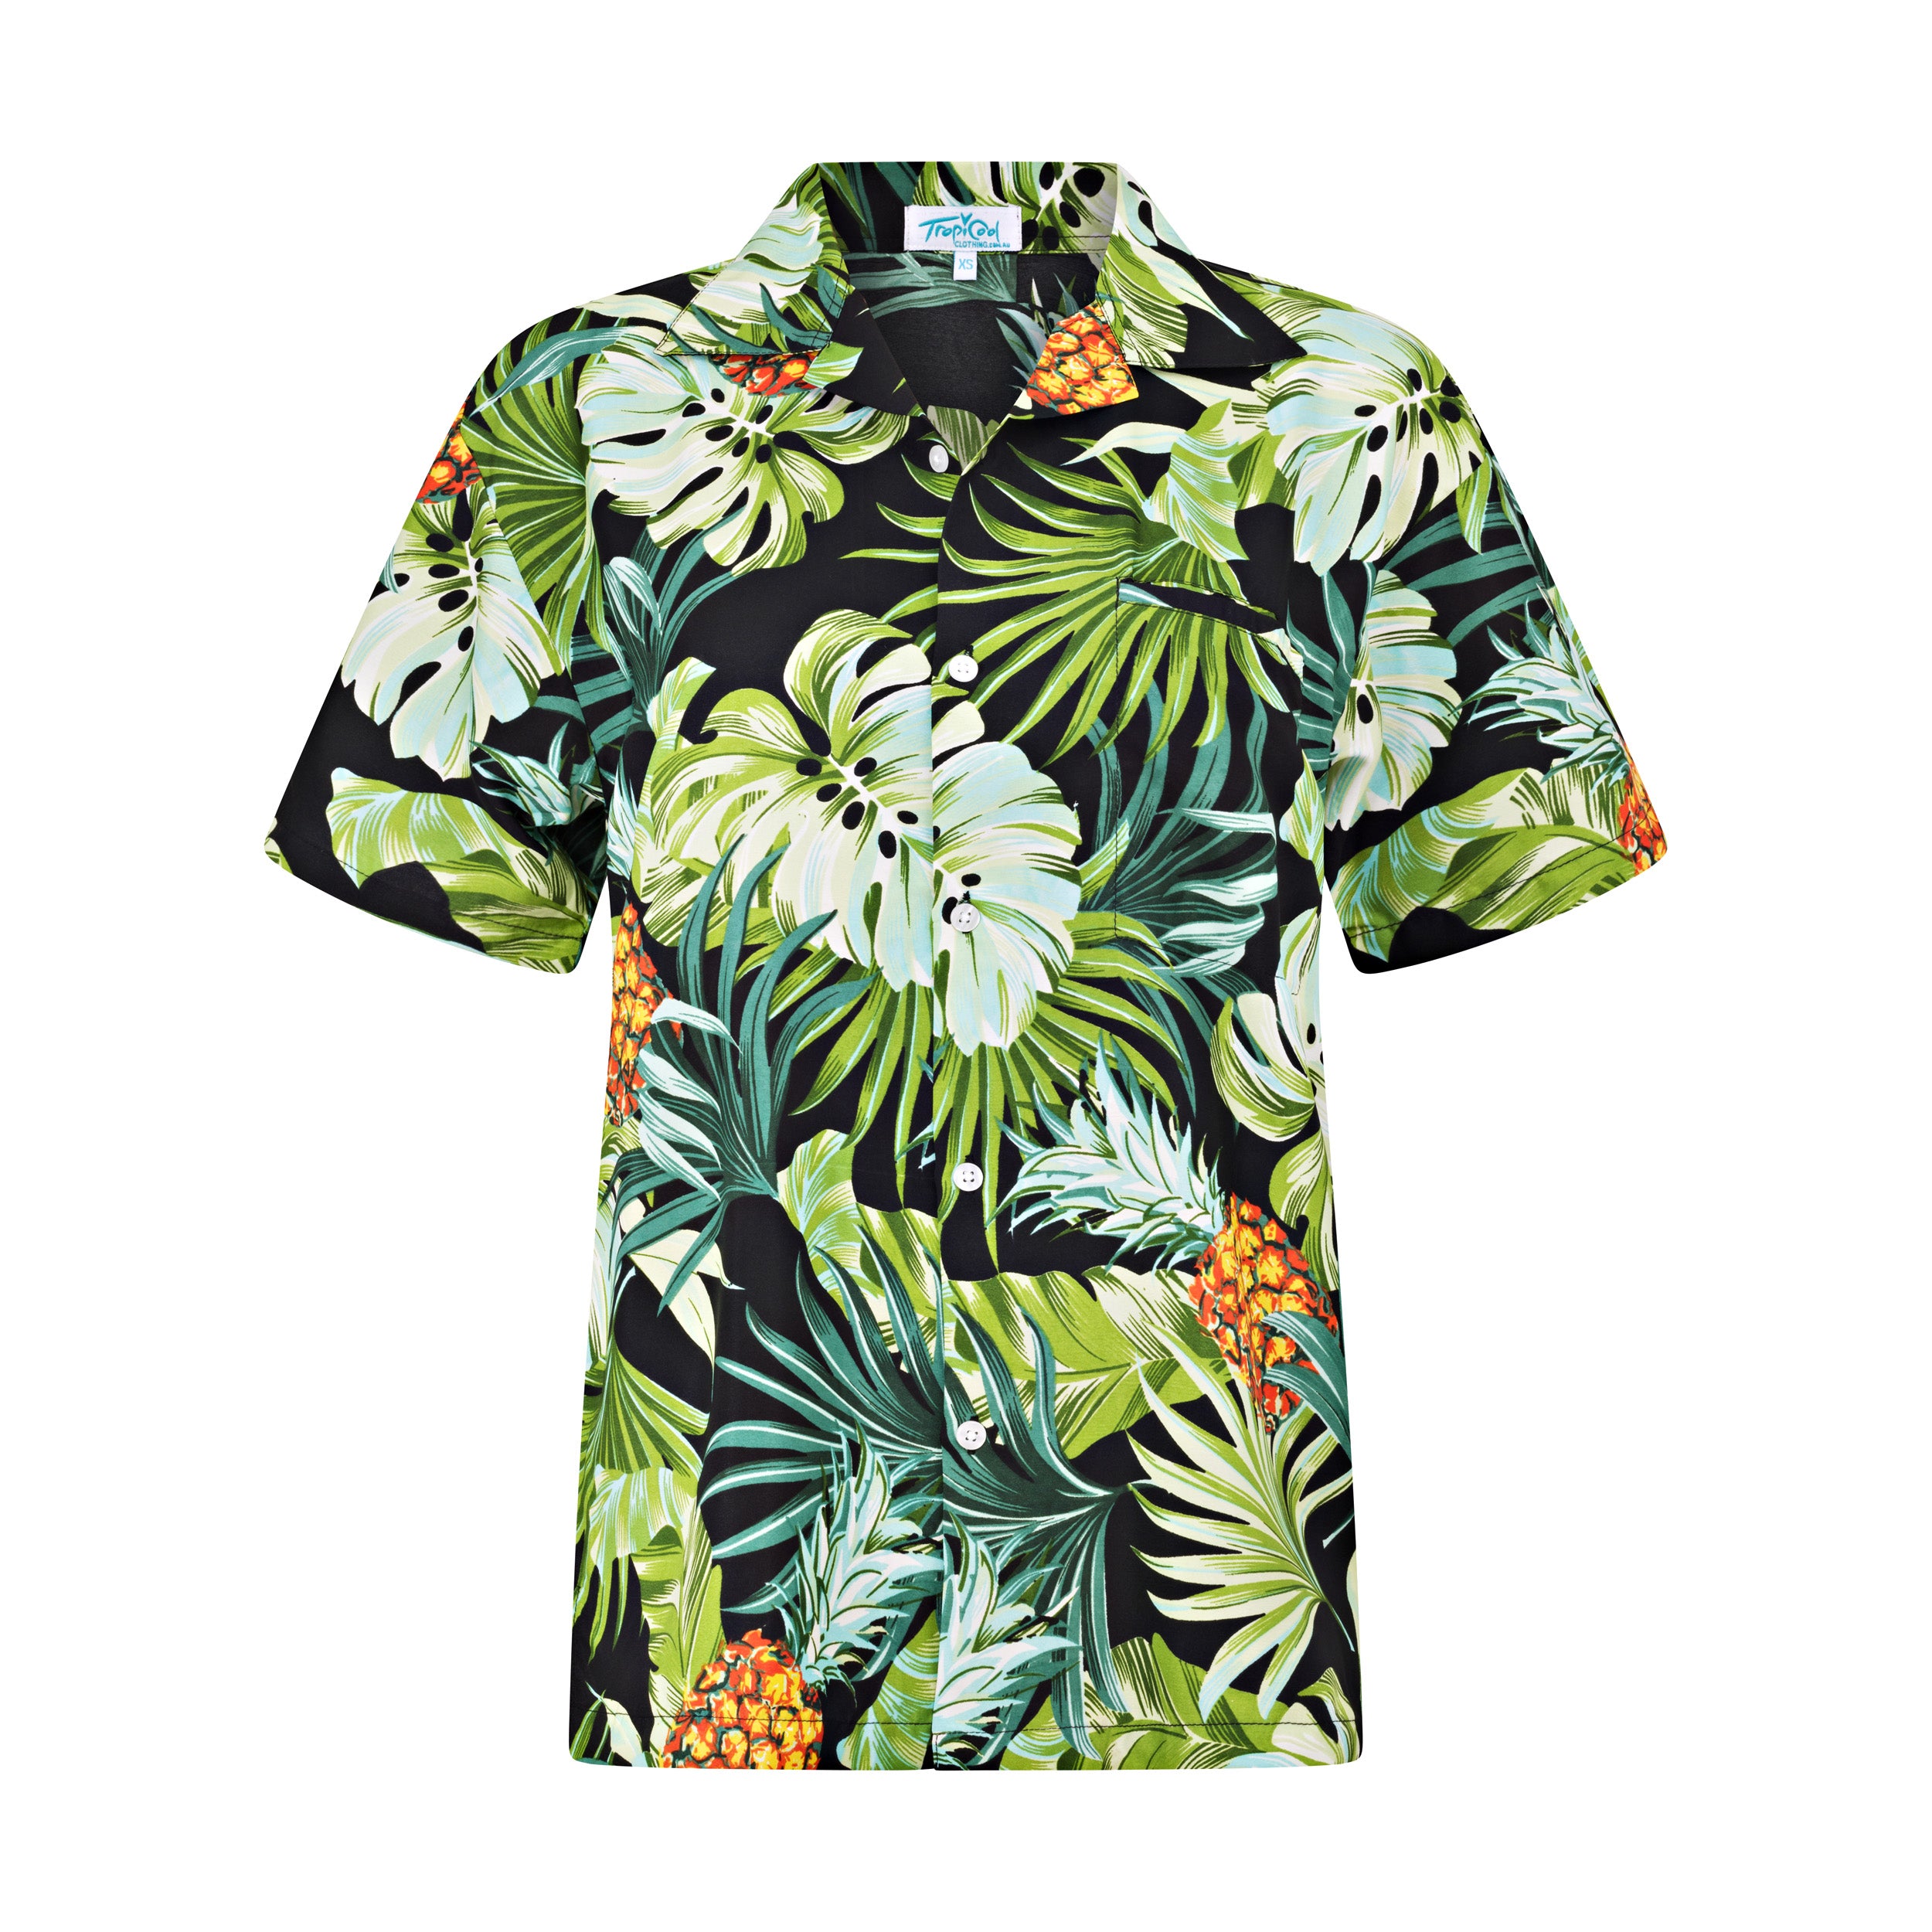 Pineapple Jungle Black and Green Adult Shirt